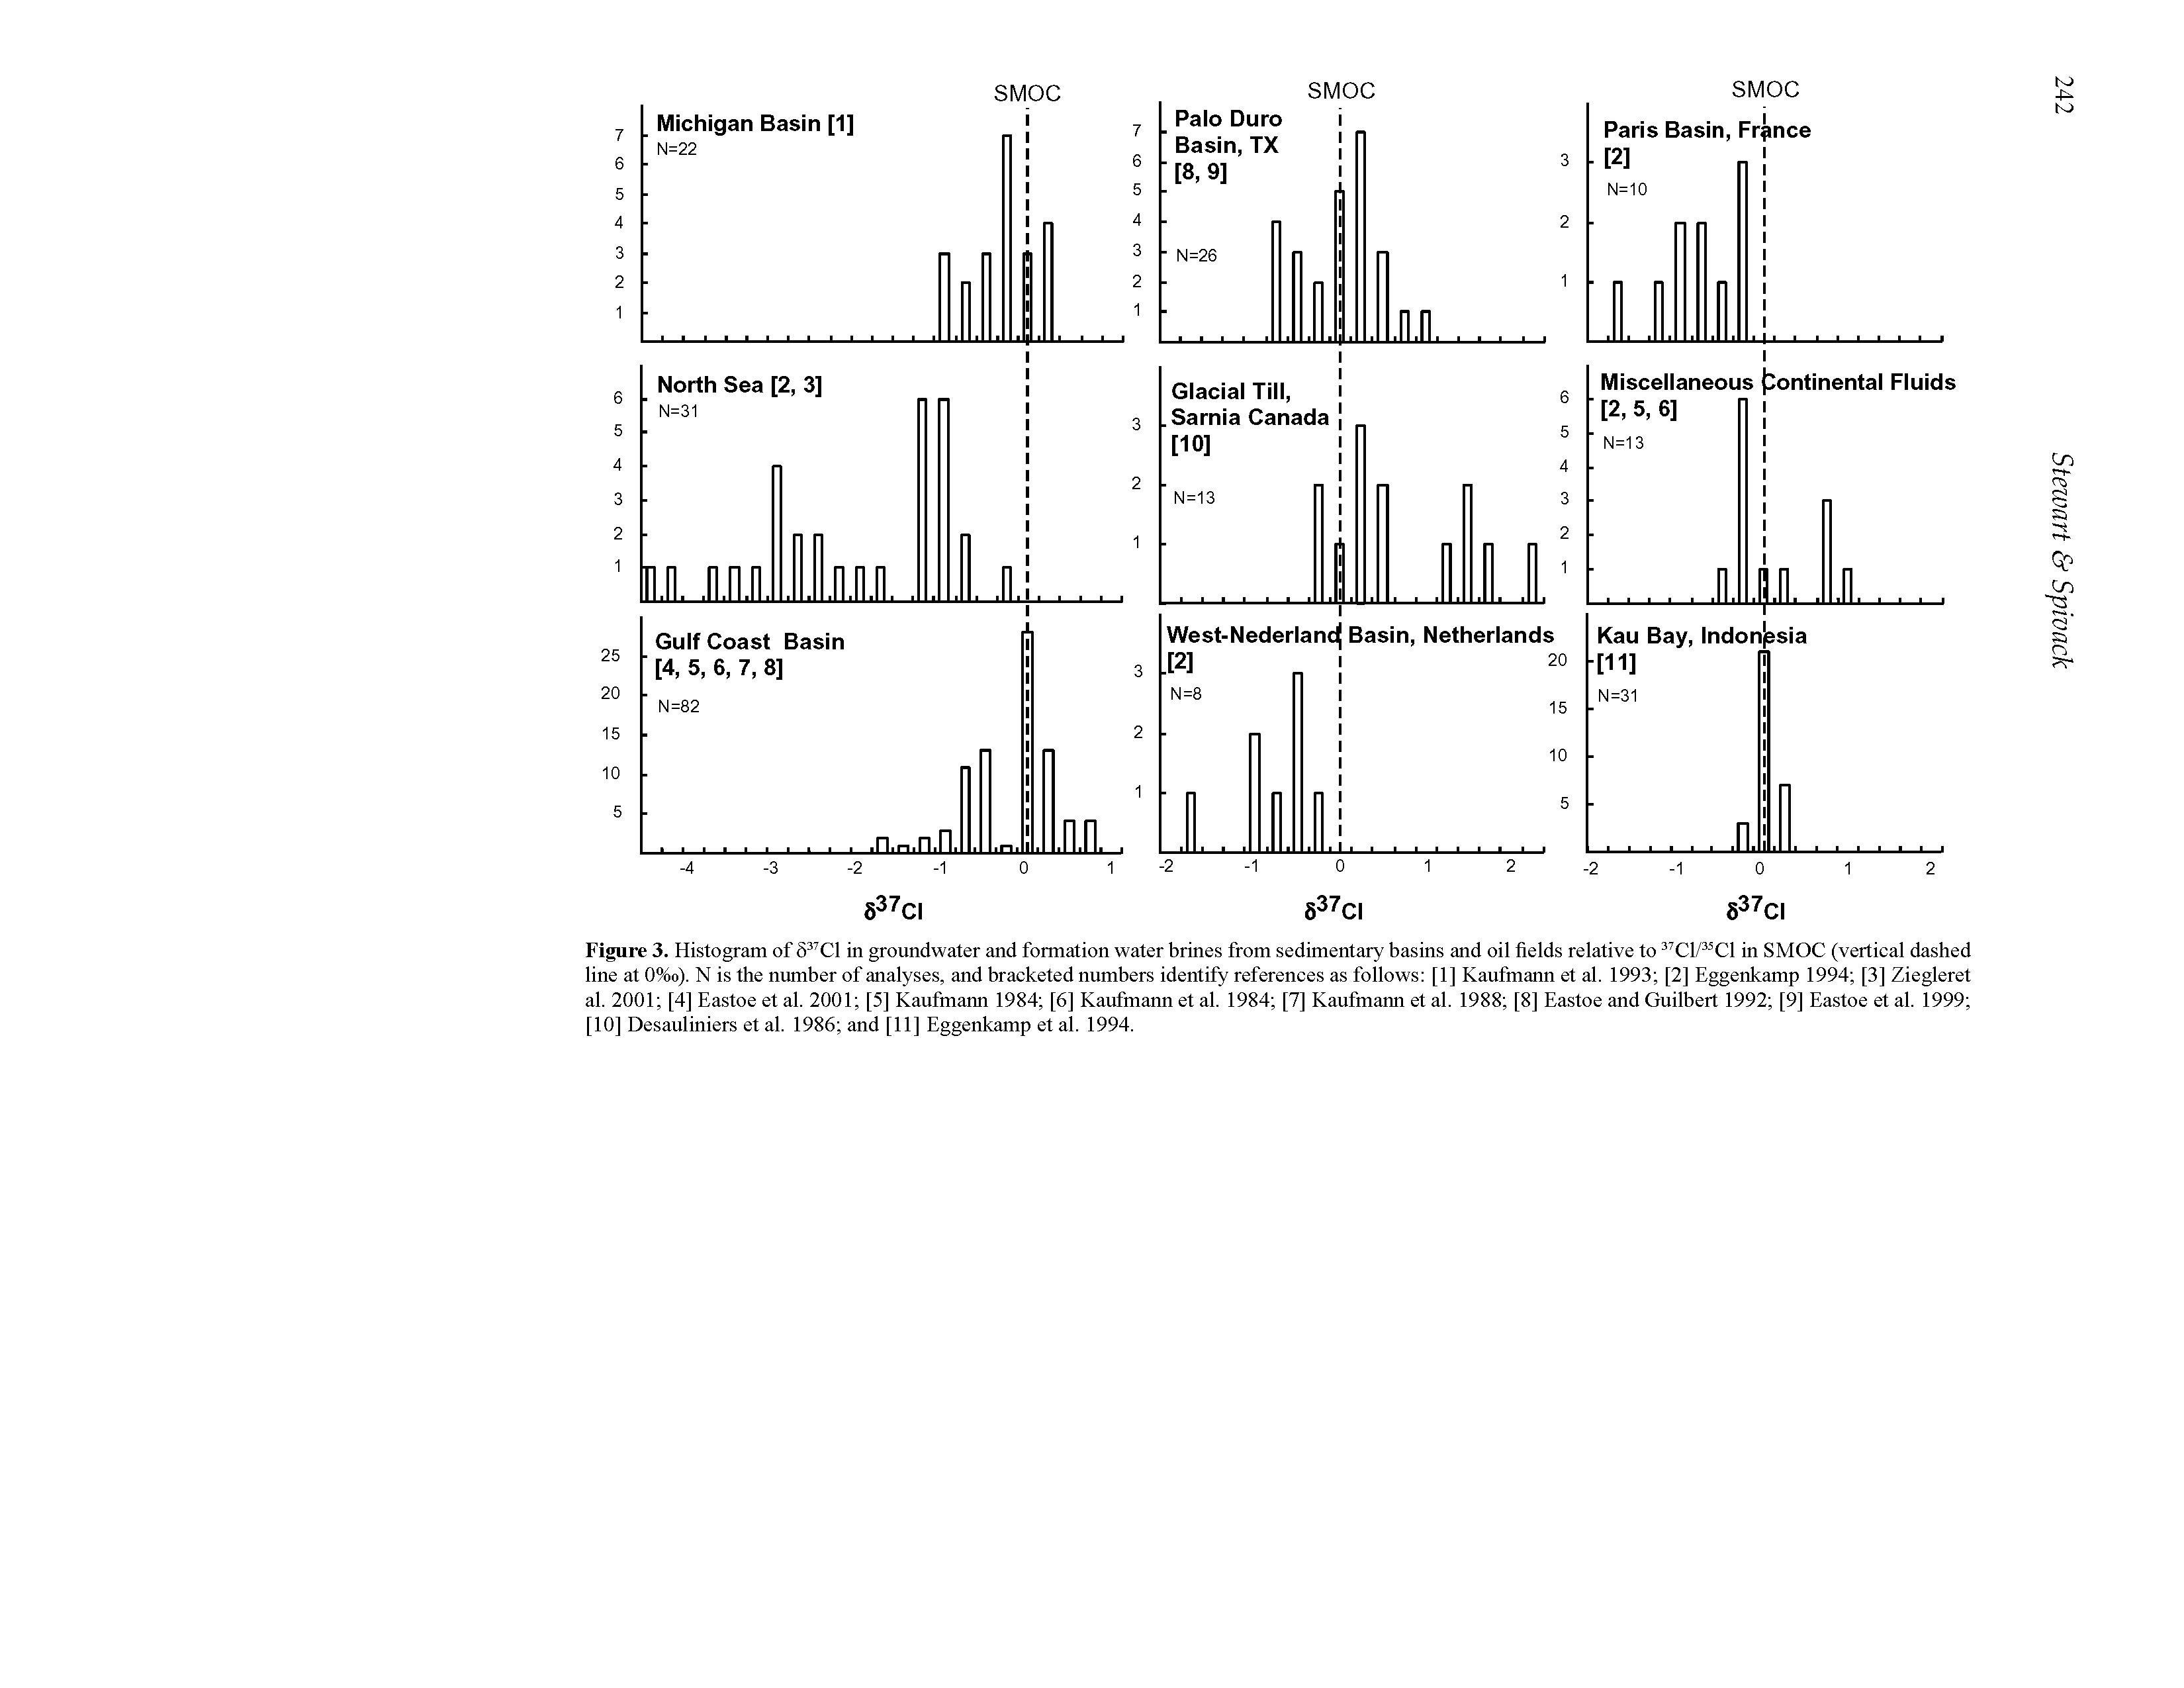 Figure 3. Histogram of 5 C1 in groundwater and formation water brines from sedimentary basins and oil fields relative to Cl/ Cl in SMOC (vertical dashed line at 0%o). N is the number of analyses, and bracketed numbers identify references as follows [1] Kaufmann et al. 1993 [2] Eggenkamp 1994 [3] Ziegleret al. 2001 [4] Eastoe et al. 2001 [5] Kaufmann 1984 [6] Kaufmann et al. 1984 [7] Kaufmann et al. 1988 [8] Eastoe and Guilbert 1992 [9] Eastoe et al. 1999 [10] Desauliniers et al. 1986 and [11] Eggenkamp et al. 1994.